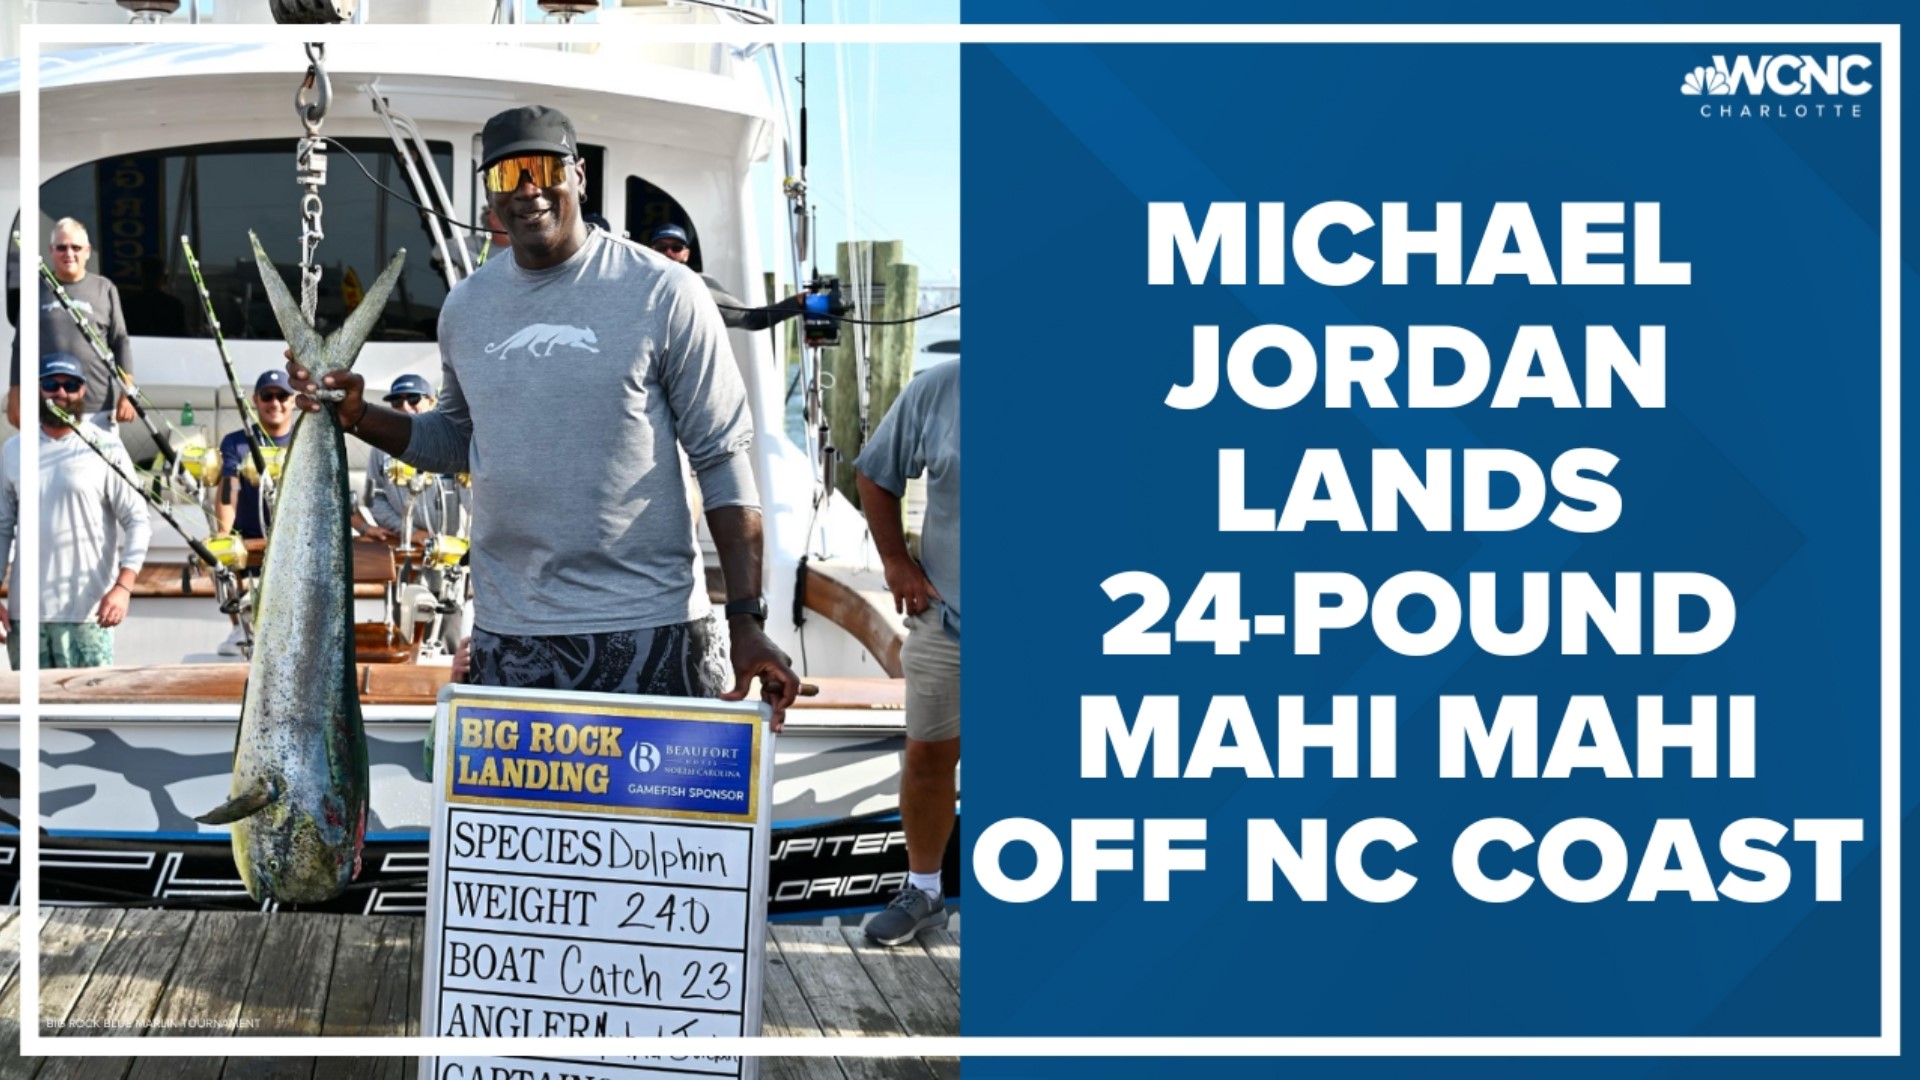 Michael Jordan reeled in a 24-pound Mahi Mahi Monday, which was the largest dolphin fish caught on the tournament's first day.